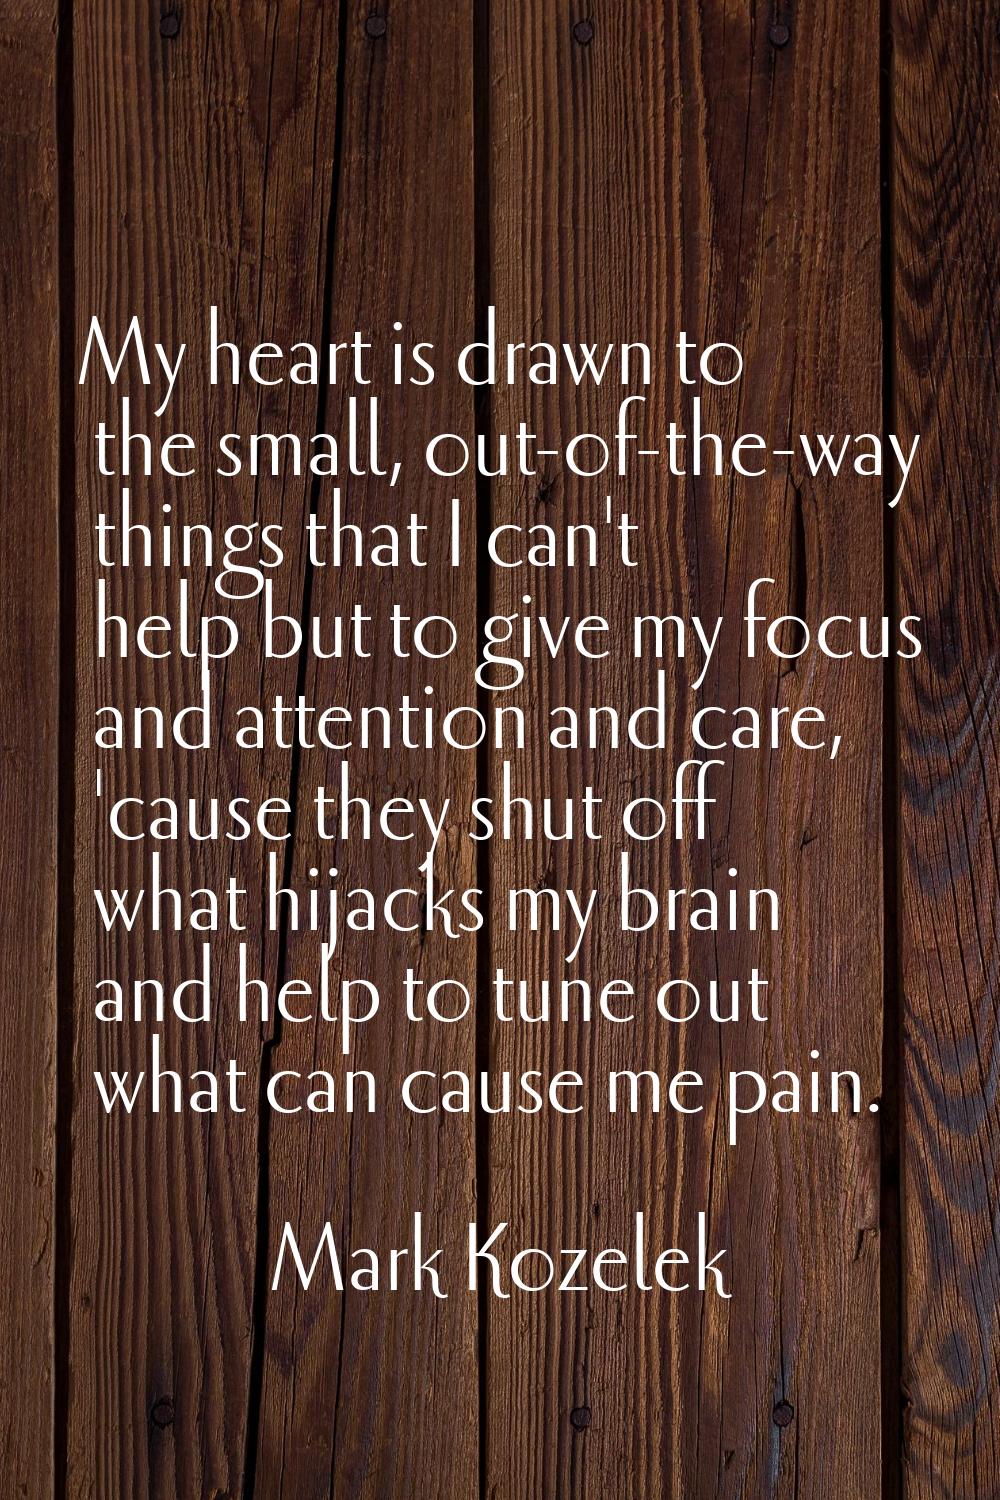 My heart is drawn to the small, out-of-the-way things that I can't help but to give my focus and at